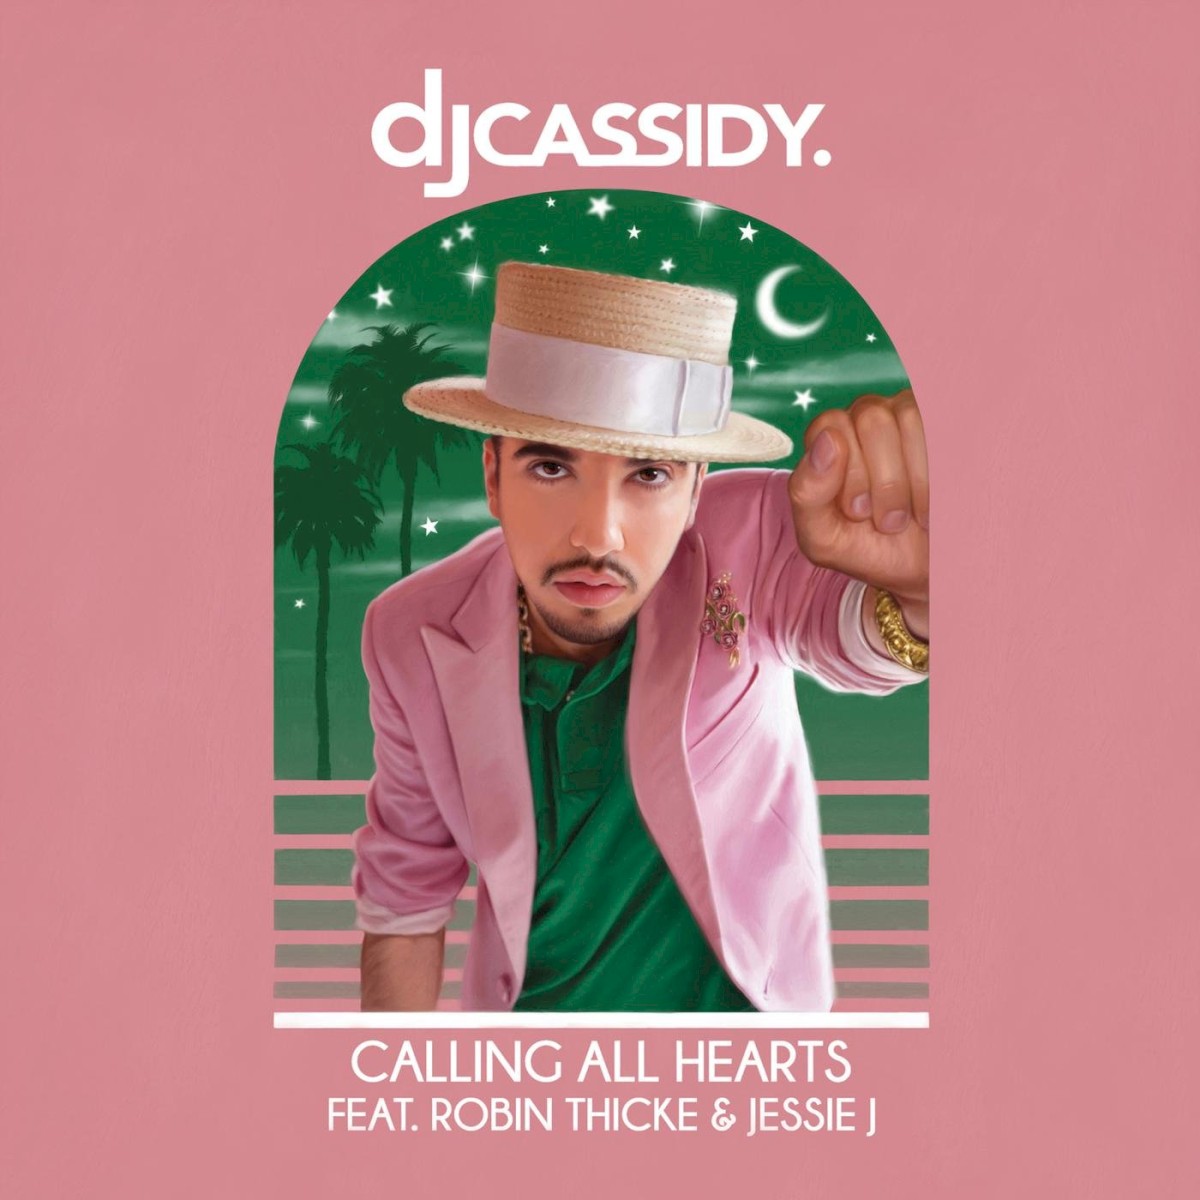 DJ Cassidy ft. featuring Robin Thicke & Jessie J Calling All Hearts cover artwork